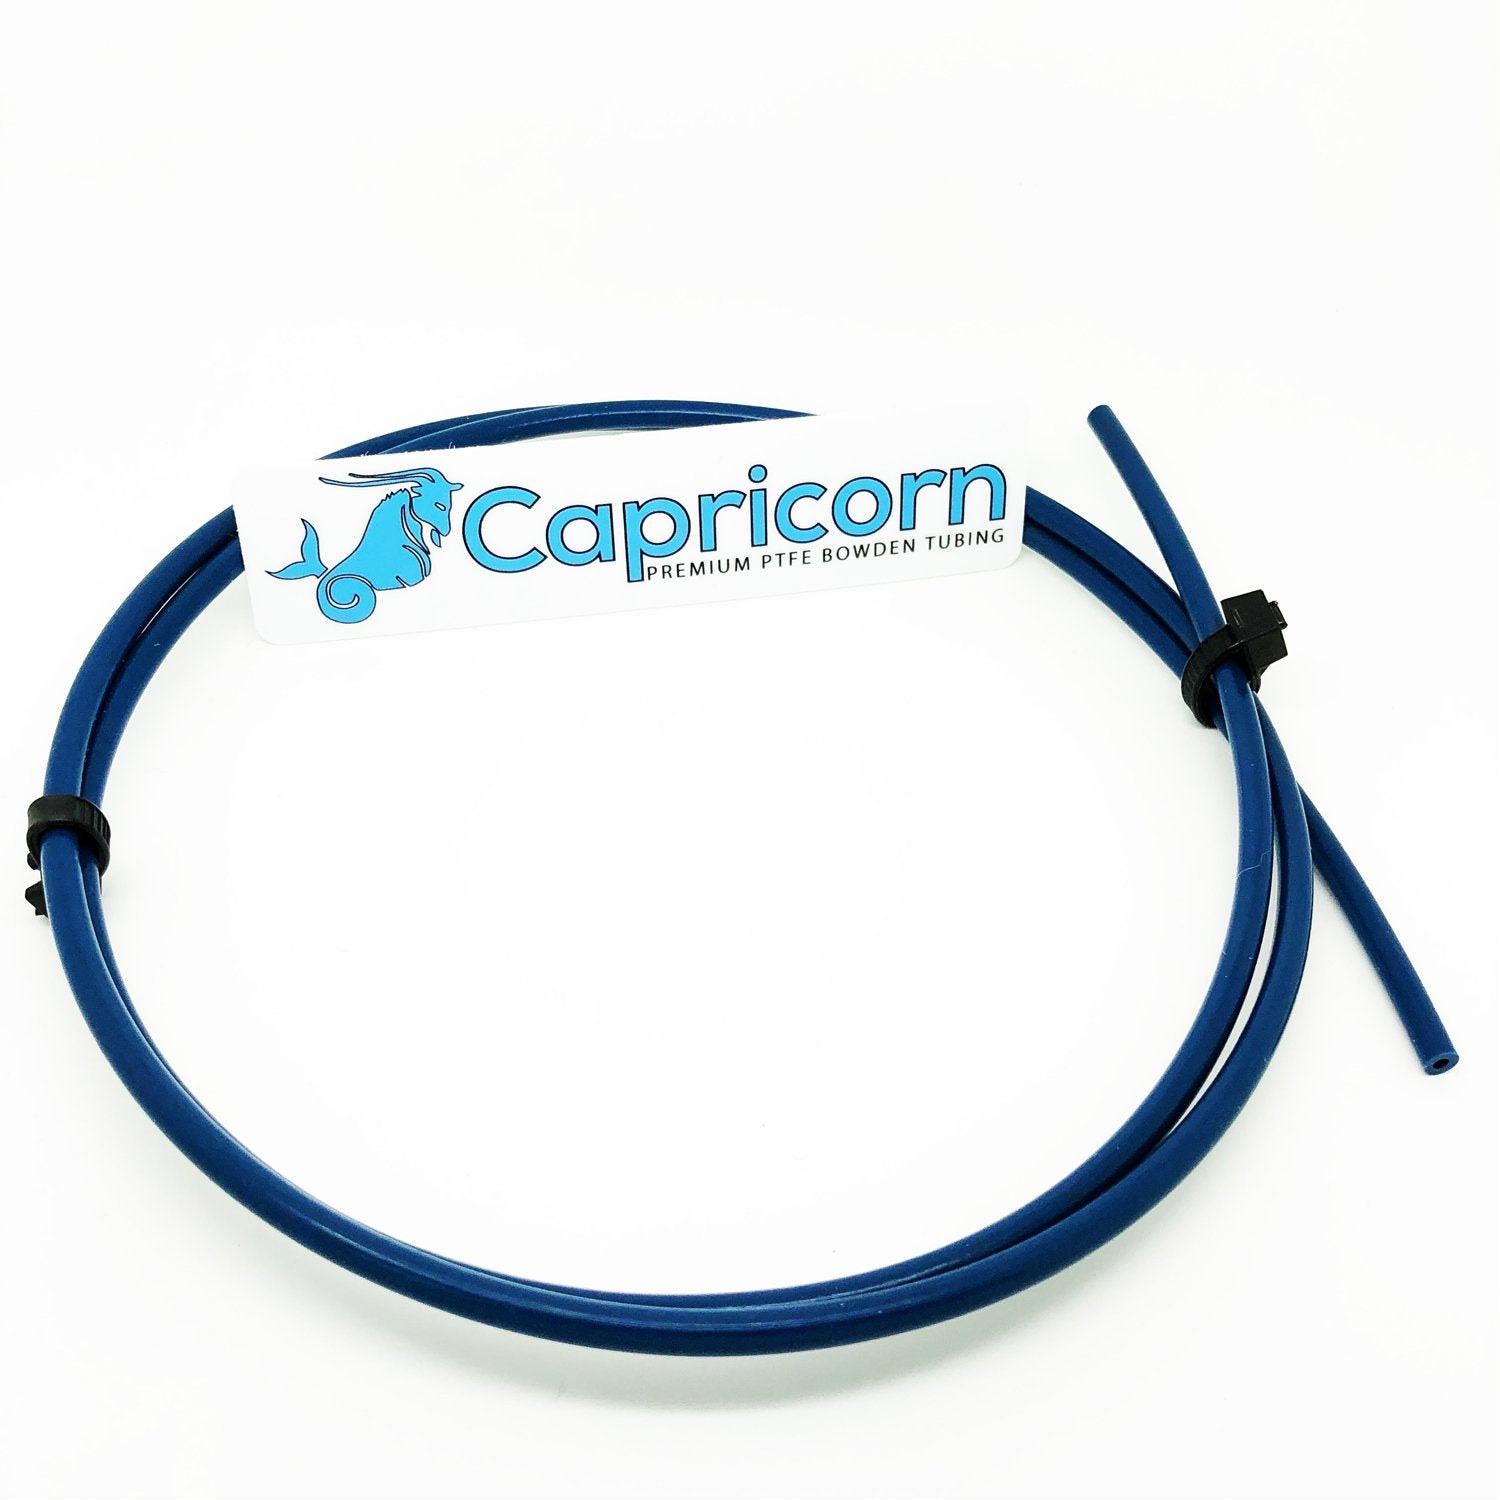  Authentic Capricorn PTFE Bowden Tubing (2 Meter) XS